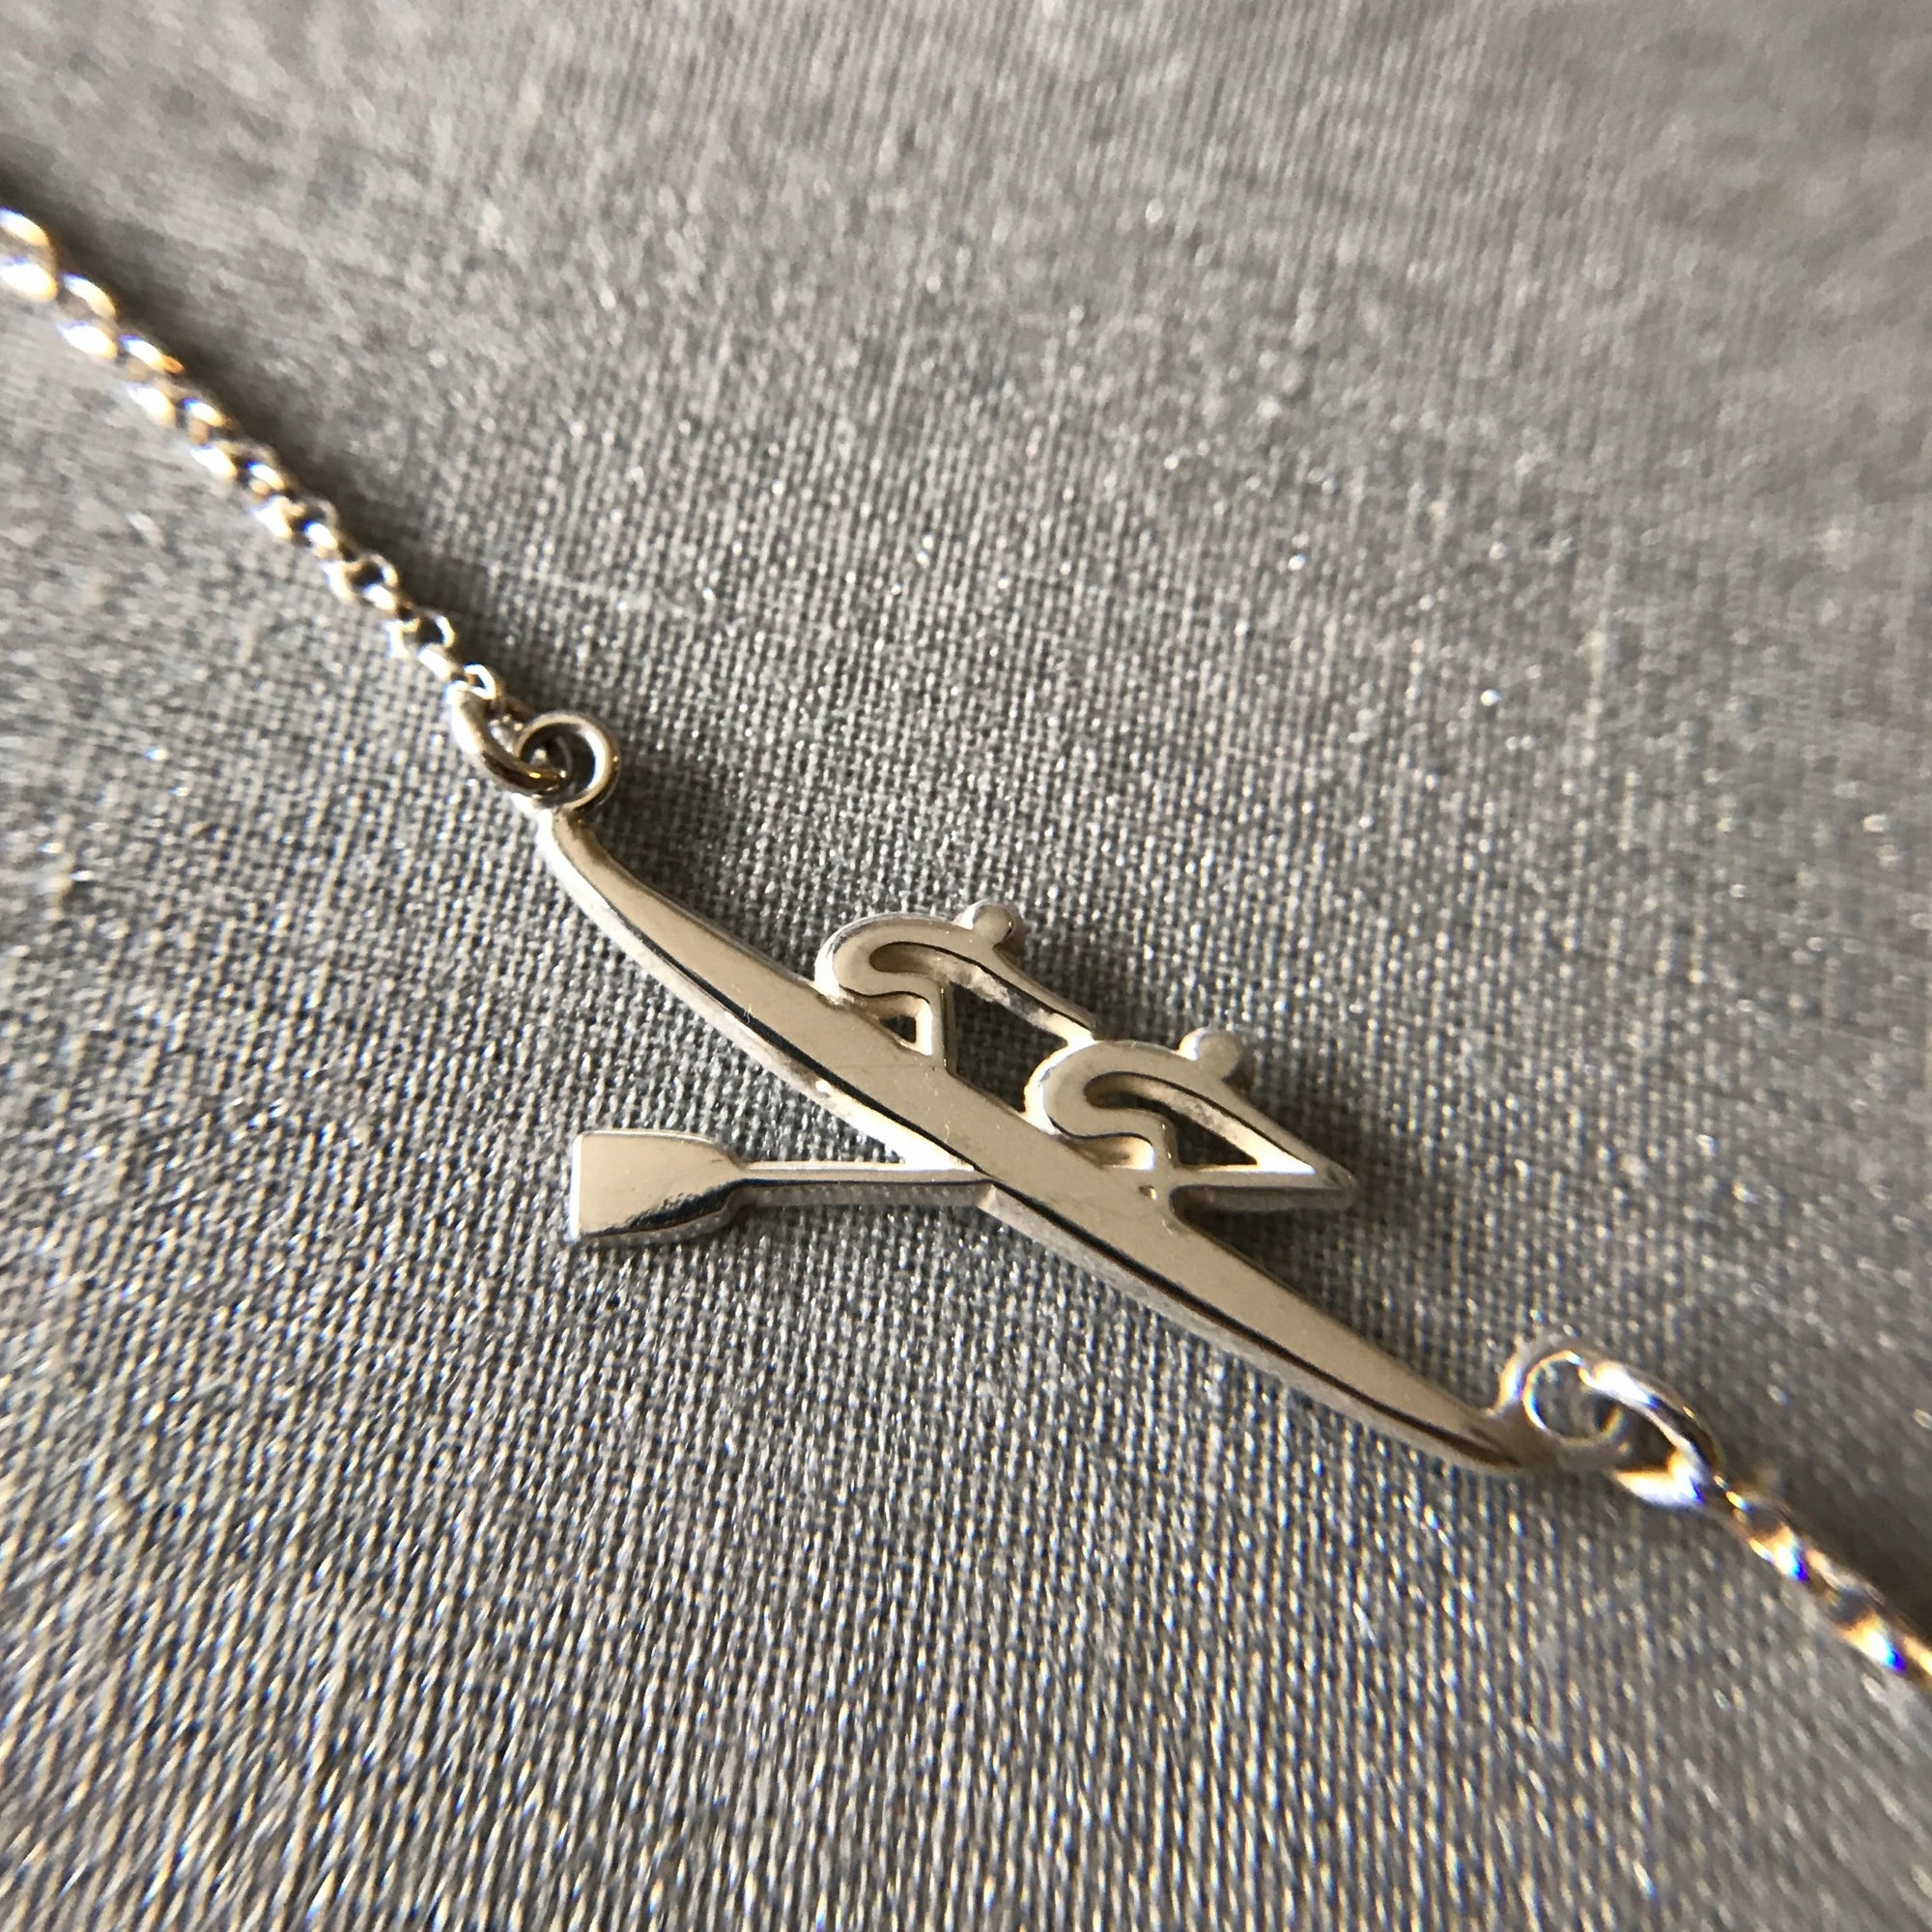 Rowing Pair Necklace - Strokeside Designs Rowing jewelry- Rowing Gifts Ideas- Rowing Coach Gifts